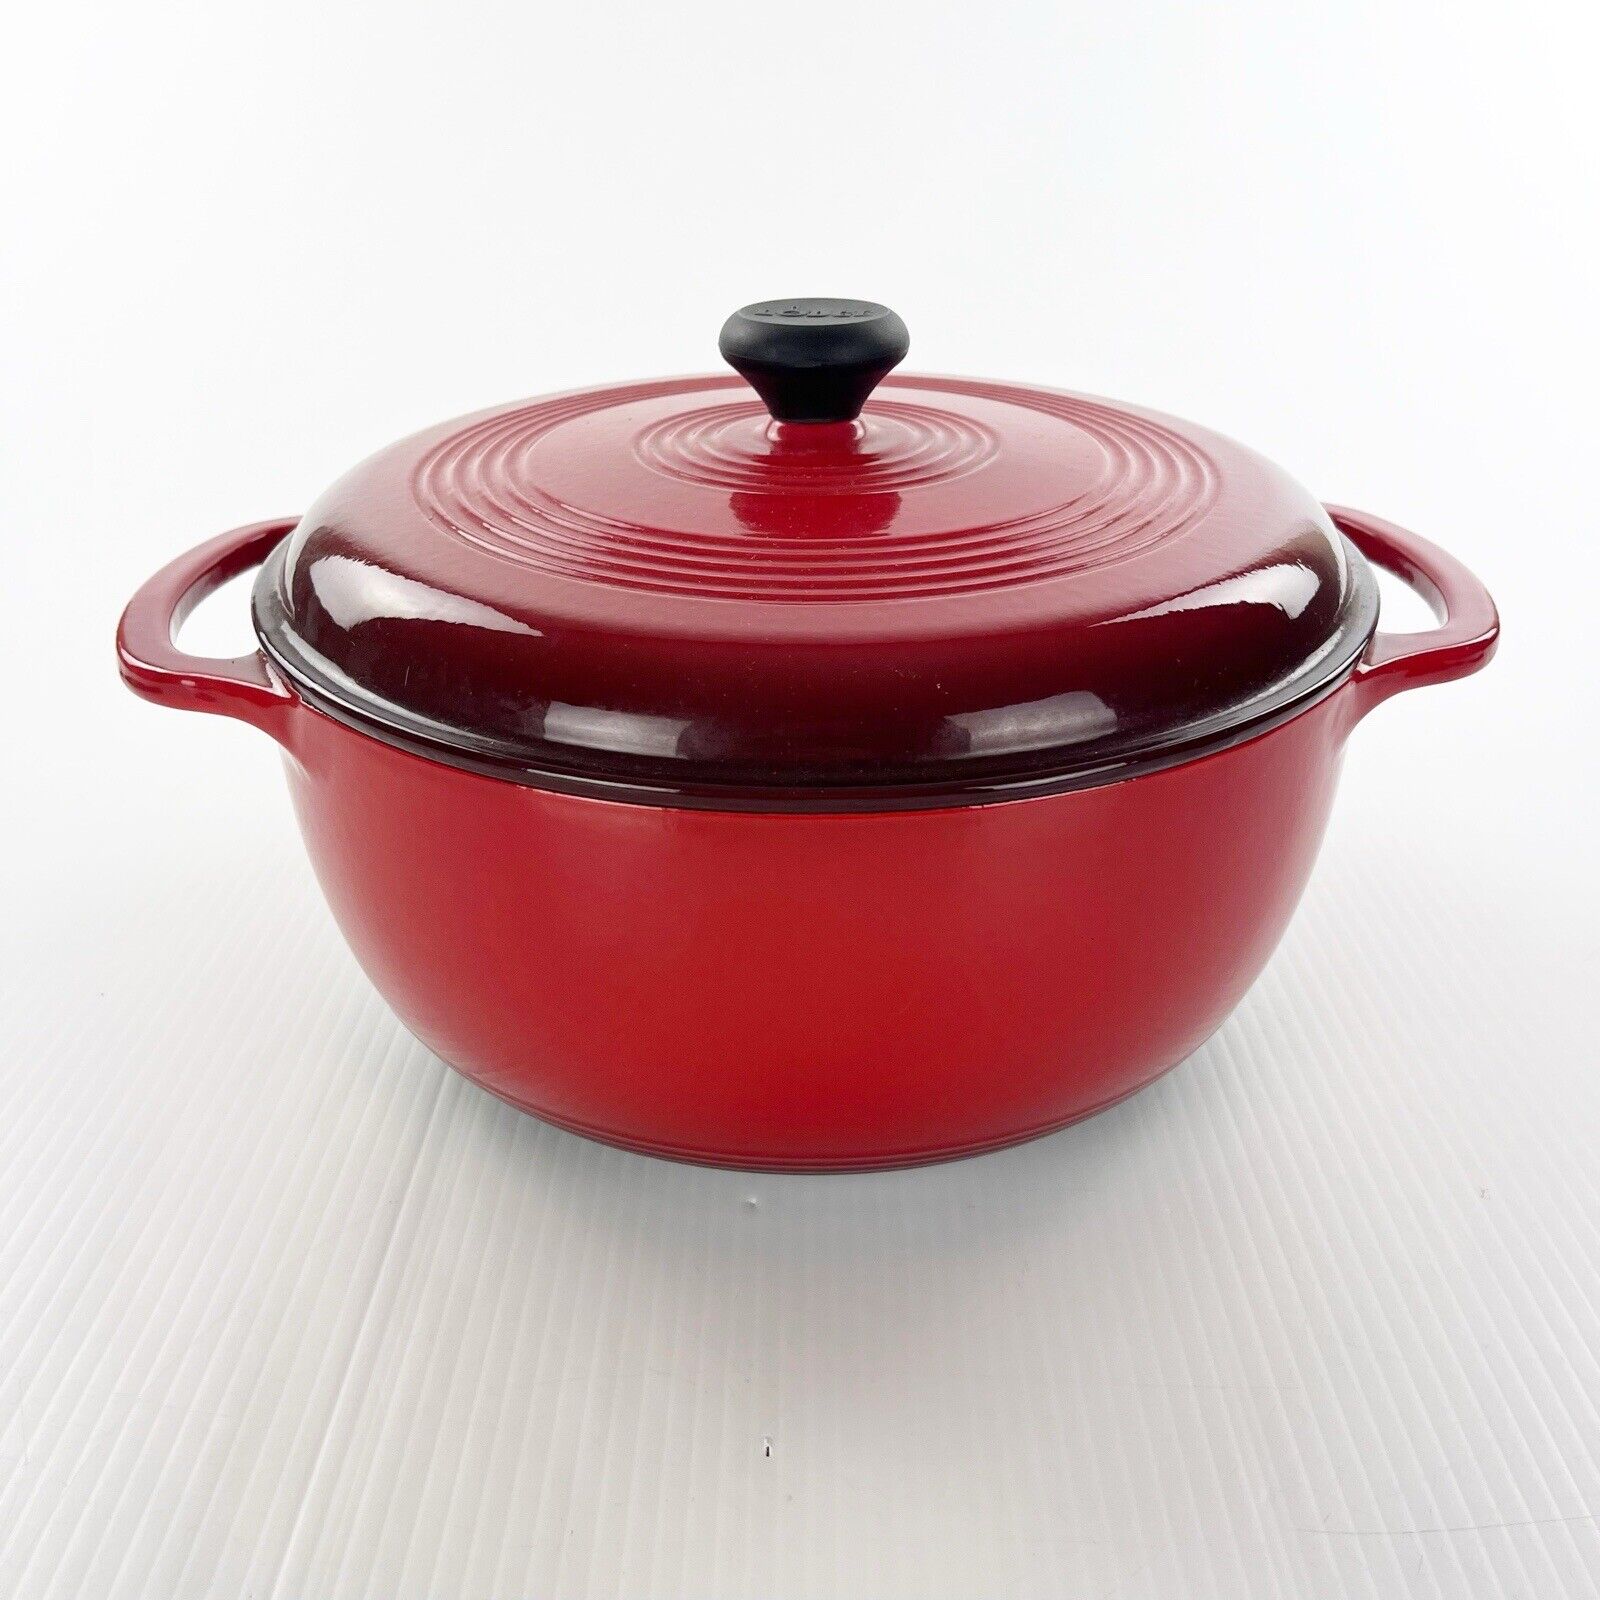 Lodge Color 3 Qt Covered Casserole Enamel on Cast Iron Cooking Pan